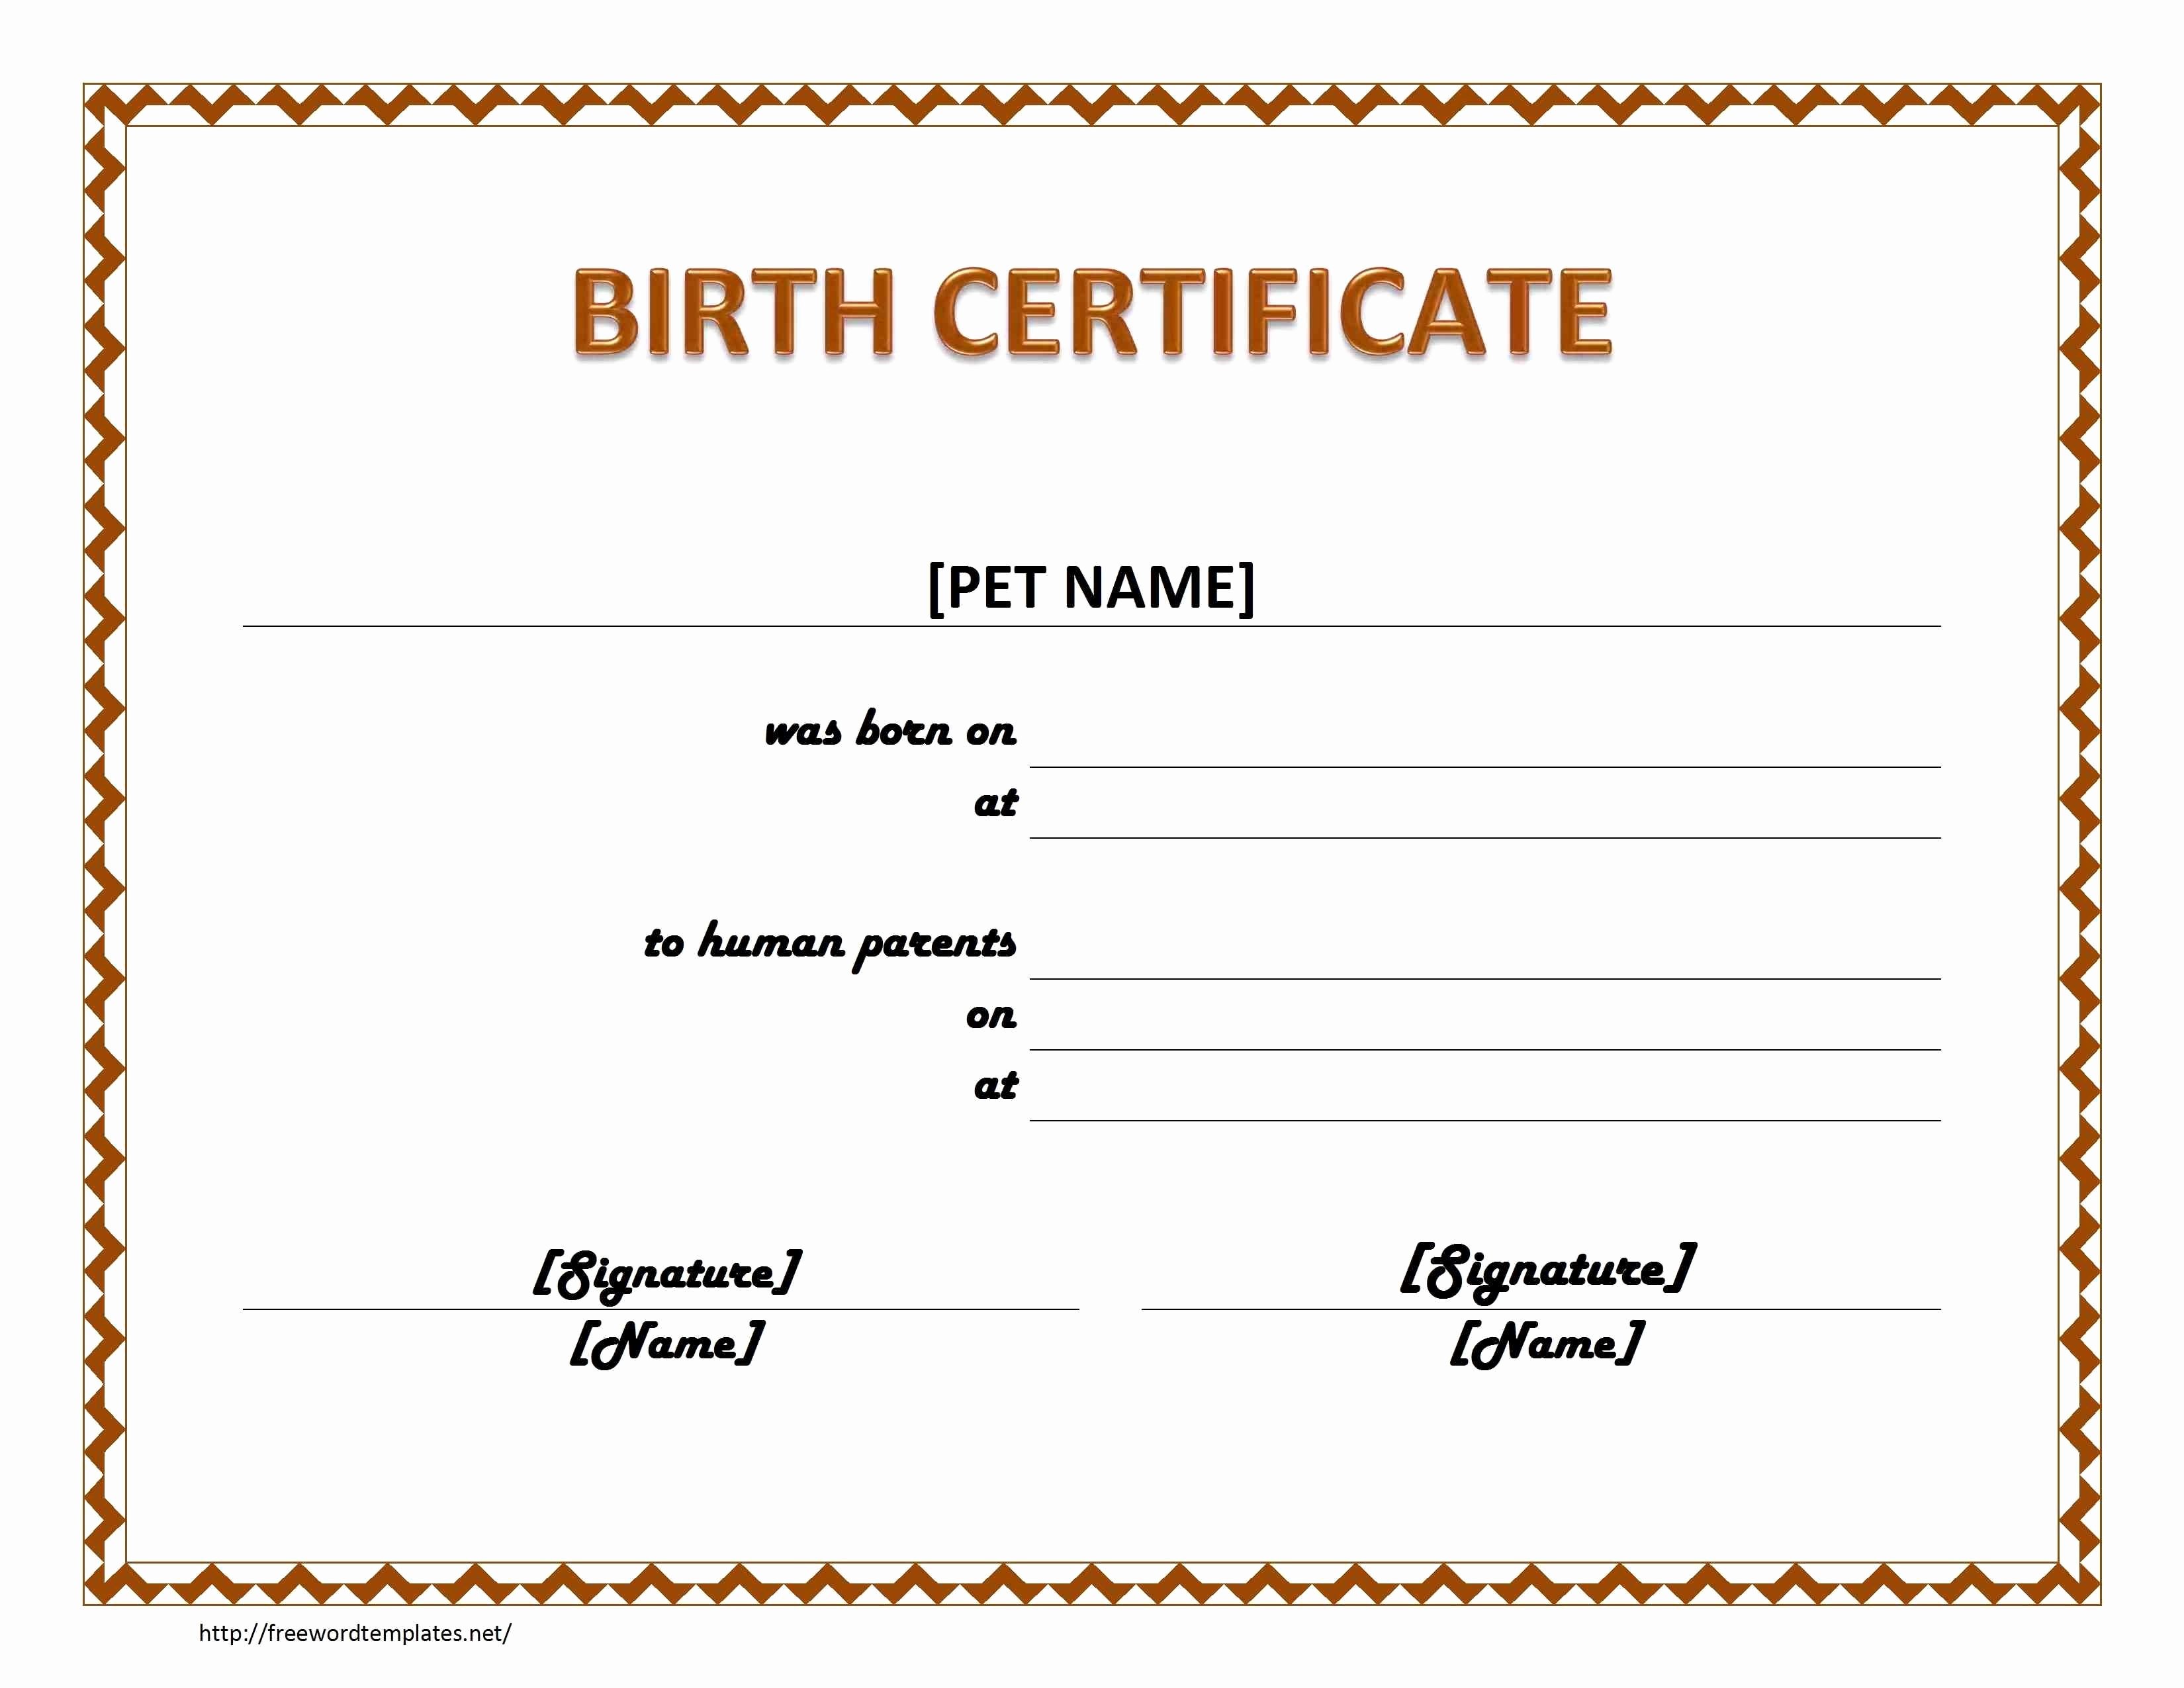 Ficial Birth Certificate Template Bamboodownunder